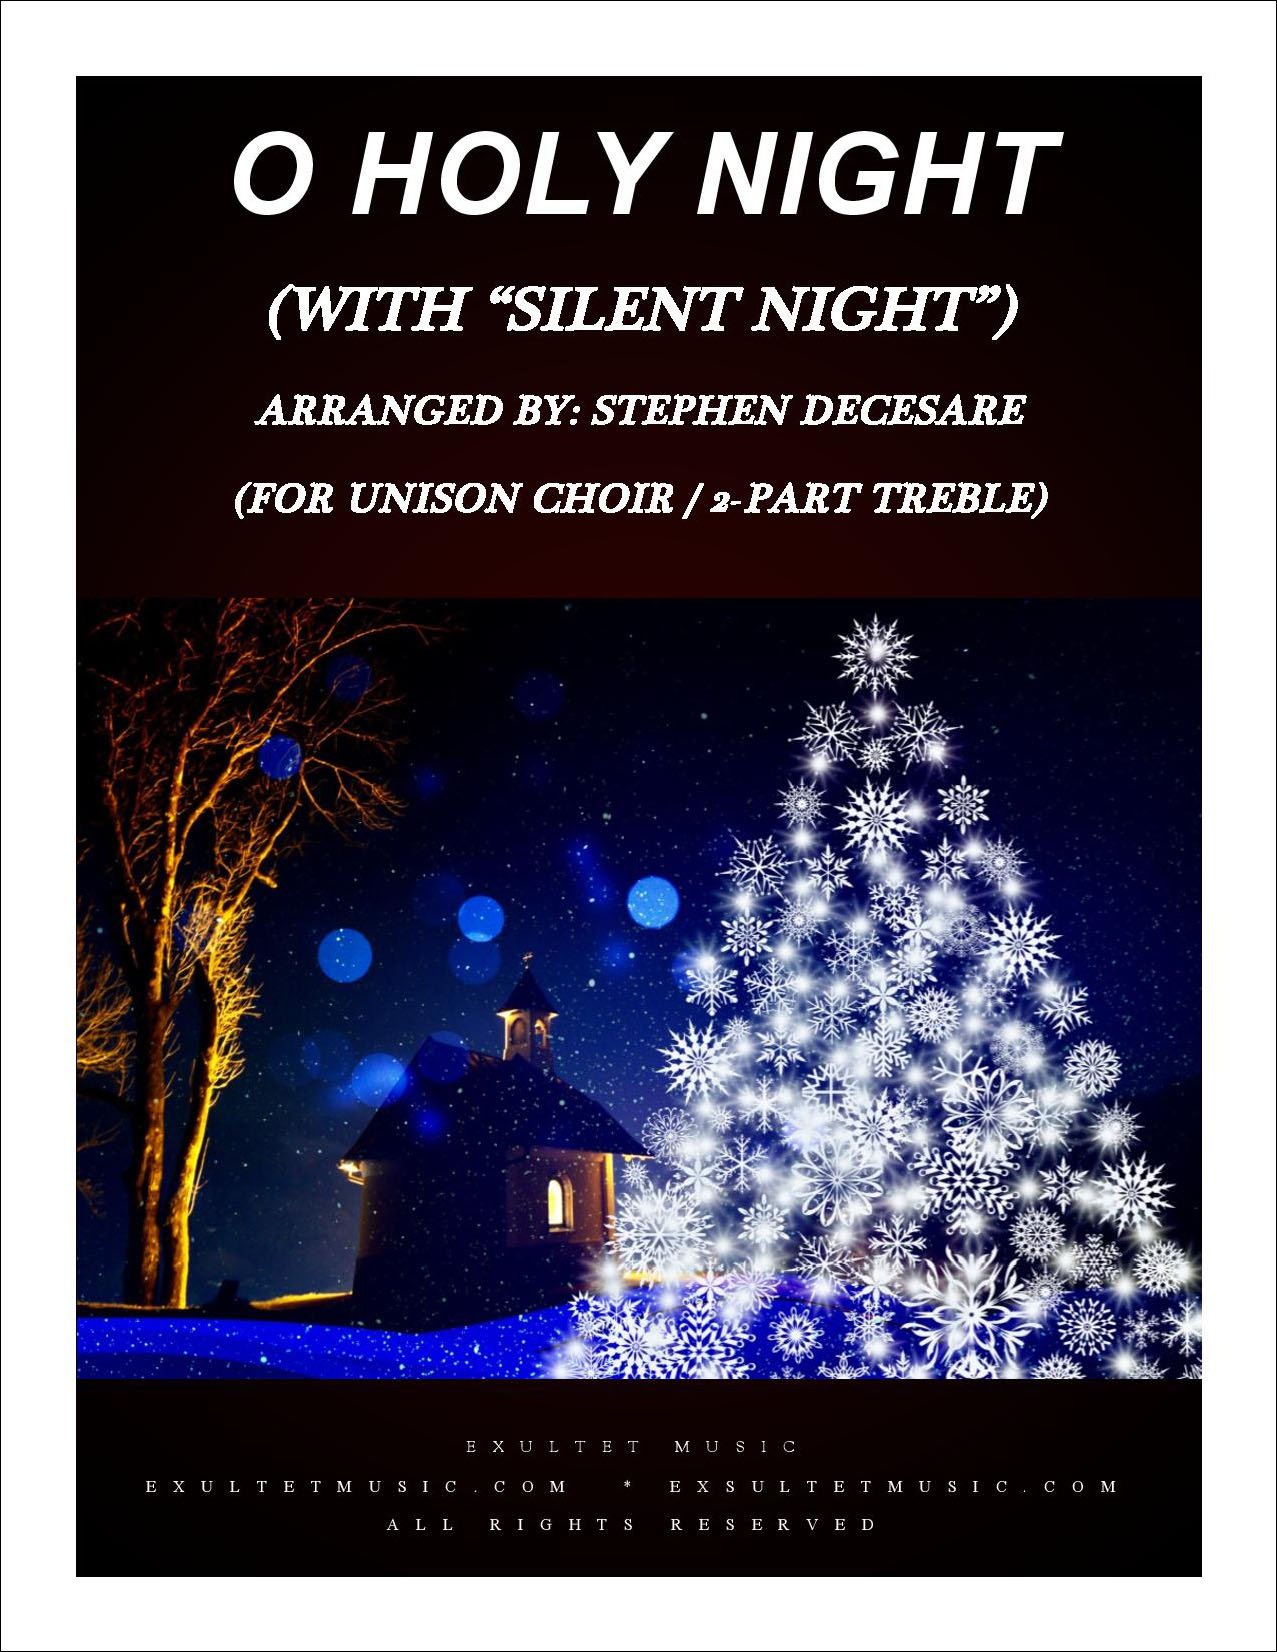 O Holy Night with Silent Night